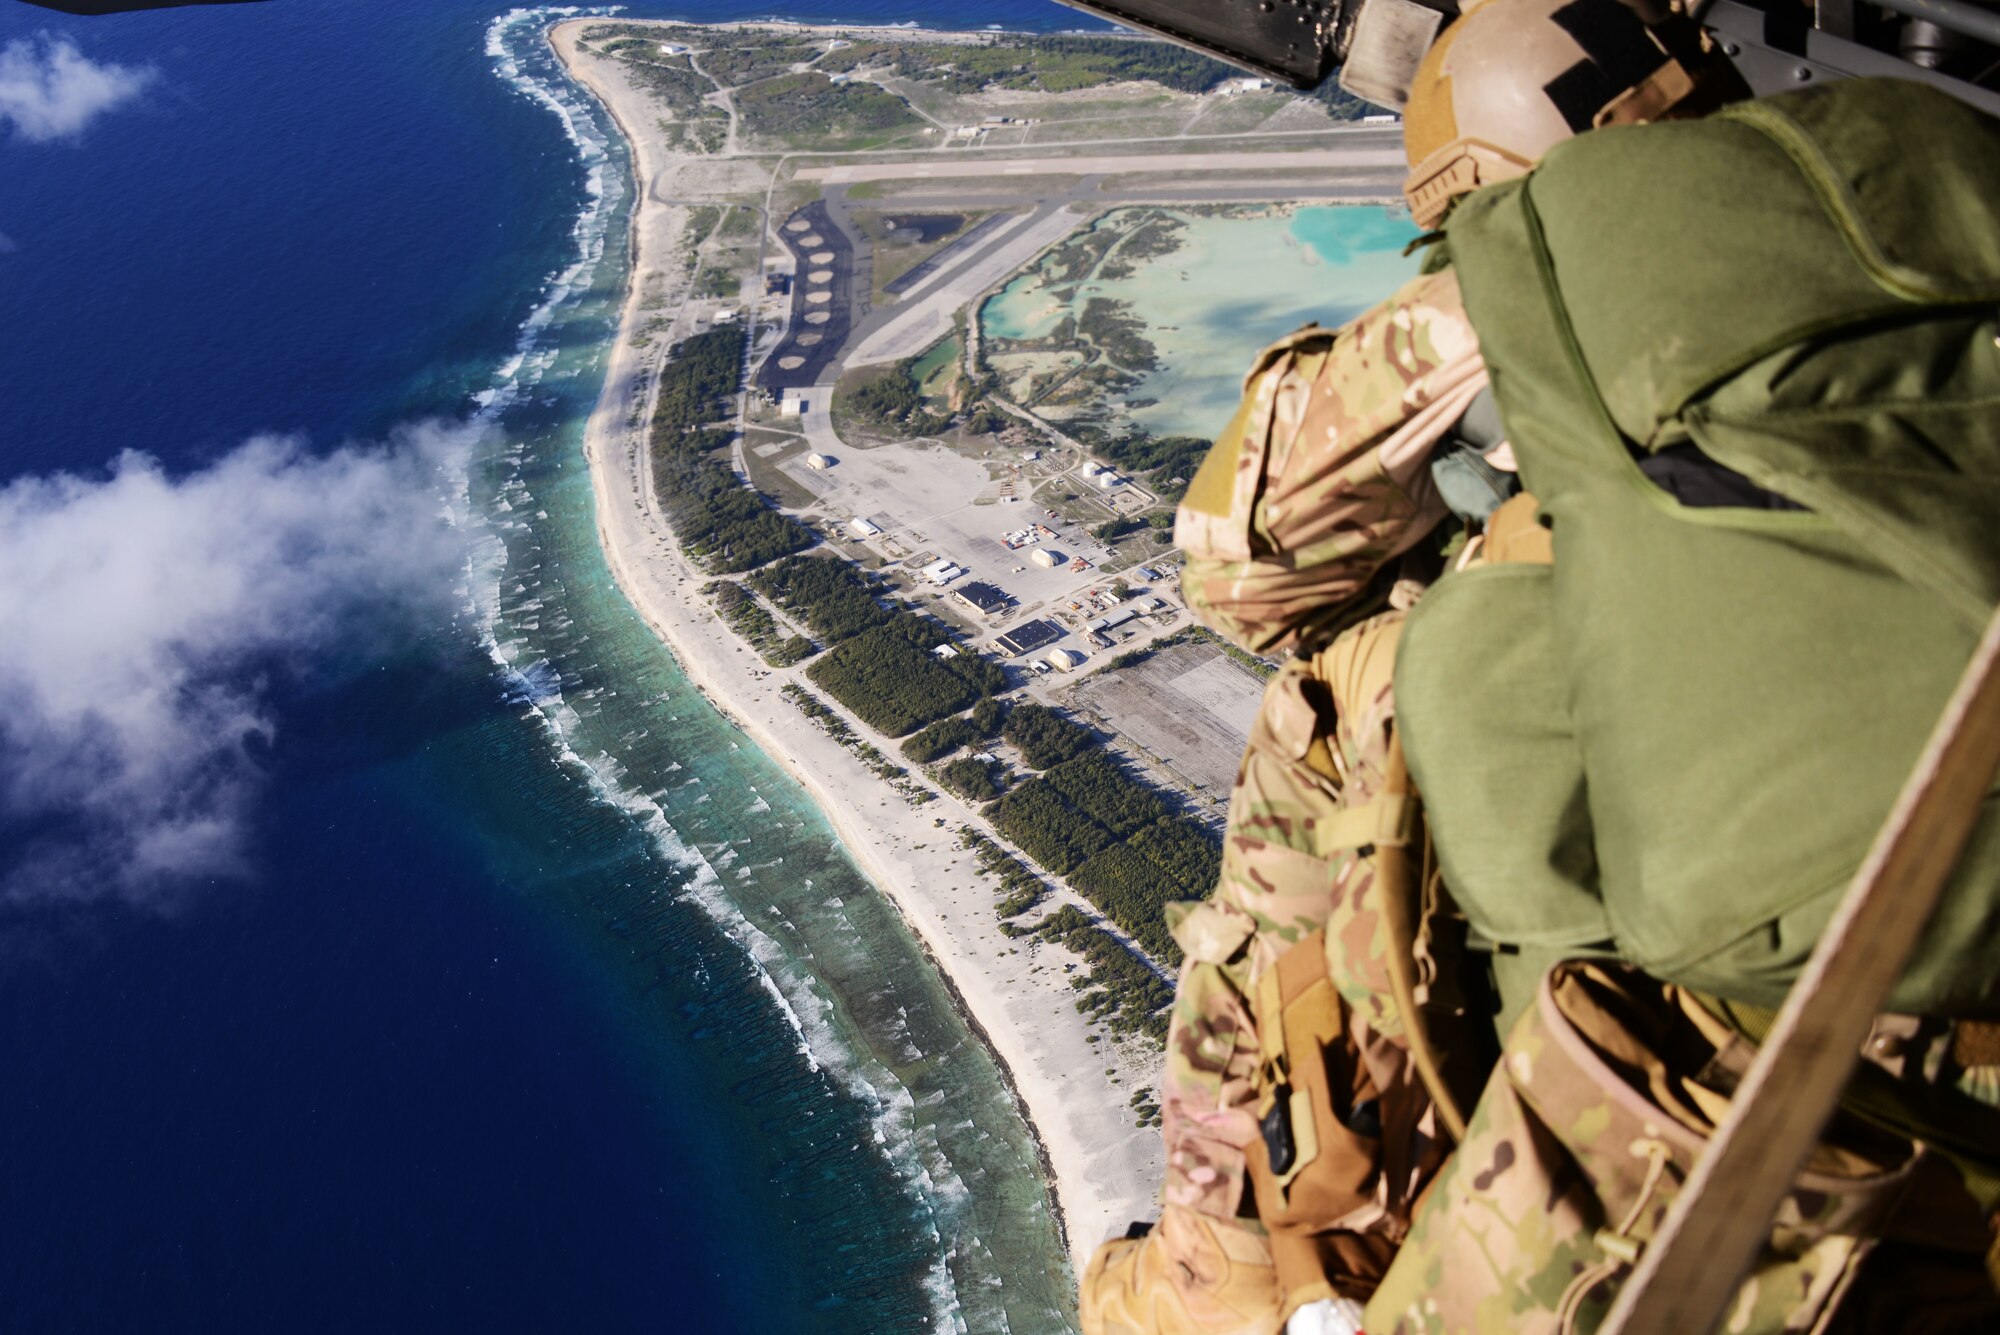 A rescue jumpmaster from the 320th Special Tactics Squadron looks upon Wake Island.